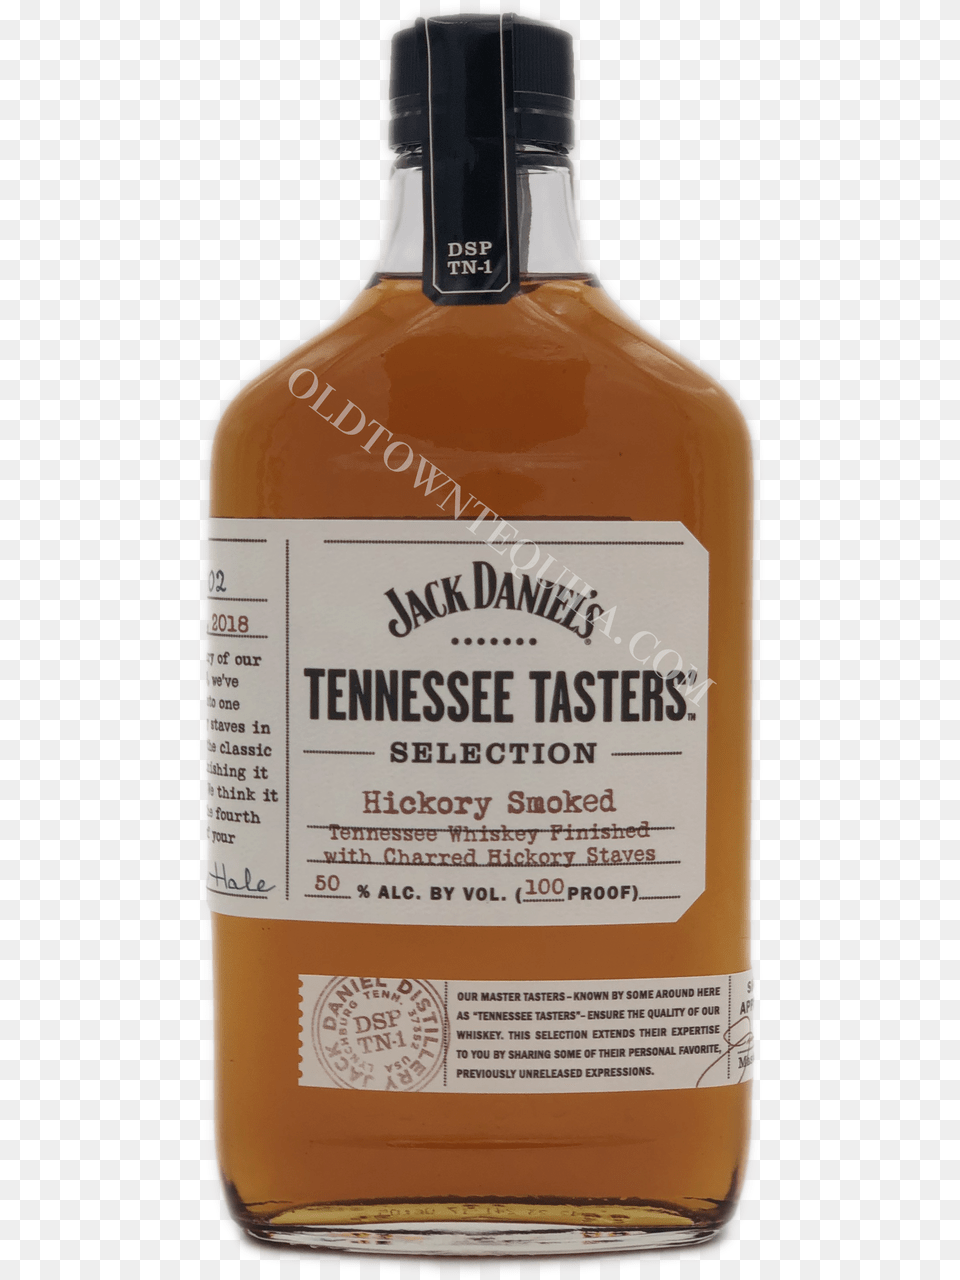 Jack Daniel S Tennessee Tasters Hickory Smoked Whiskey Glass Bottle, Alcohol, Beverage, Liquor, Whisky Free Png Download